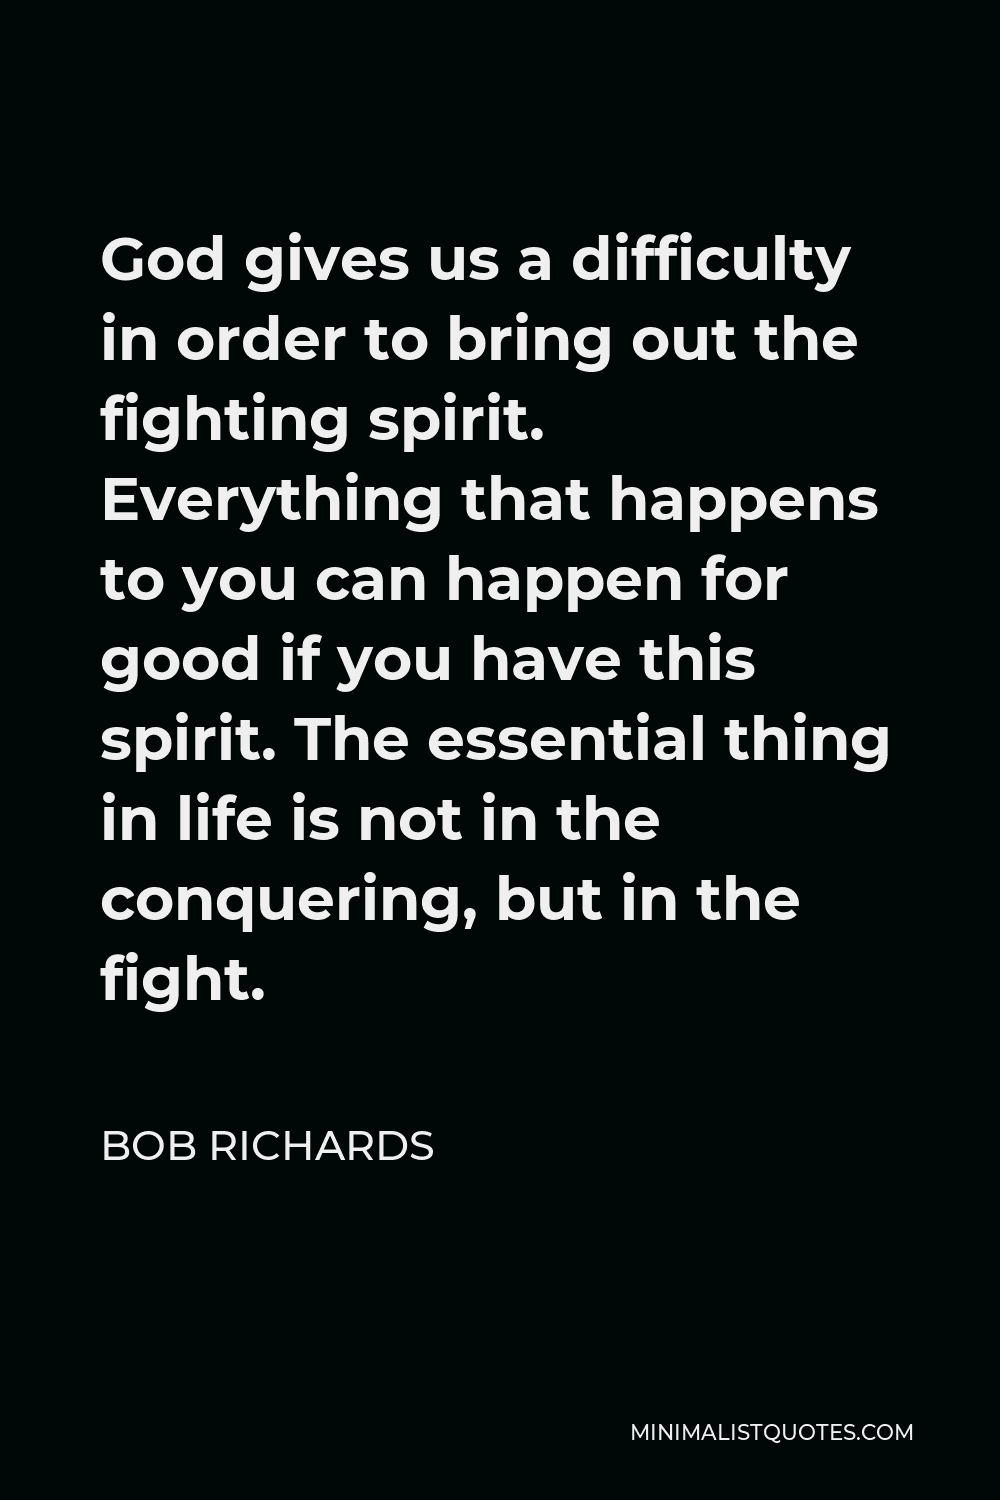 Bob Richards Quote - God gives us a difficulty in order to bring out the fighting spirit. Everything that happens to you can happen for good if you have this spirit. The essential thing in life is not in the conquering, but in the fight.